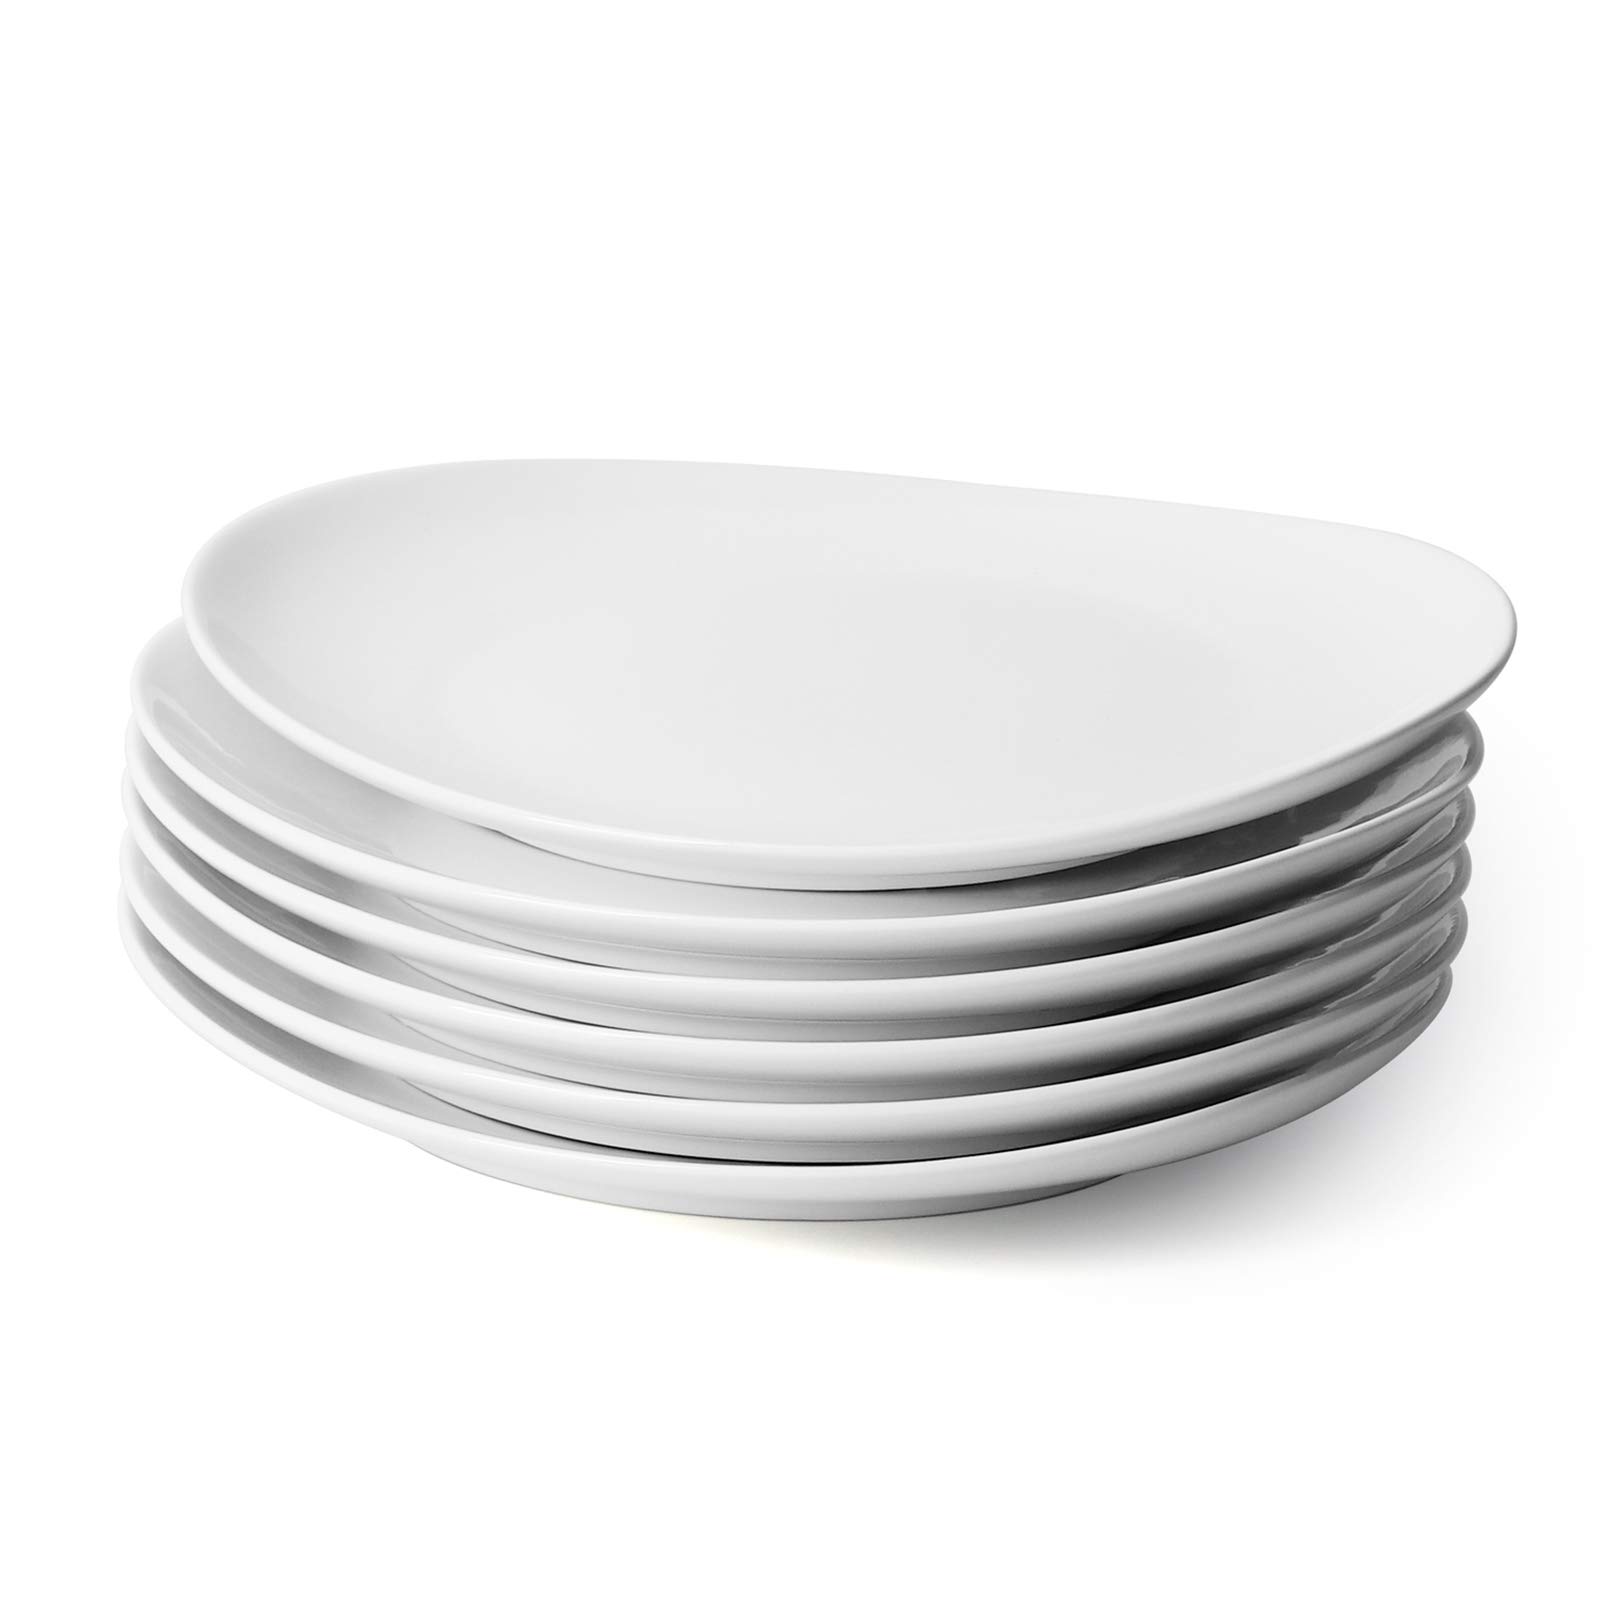 what causes the plates to move